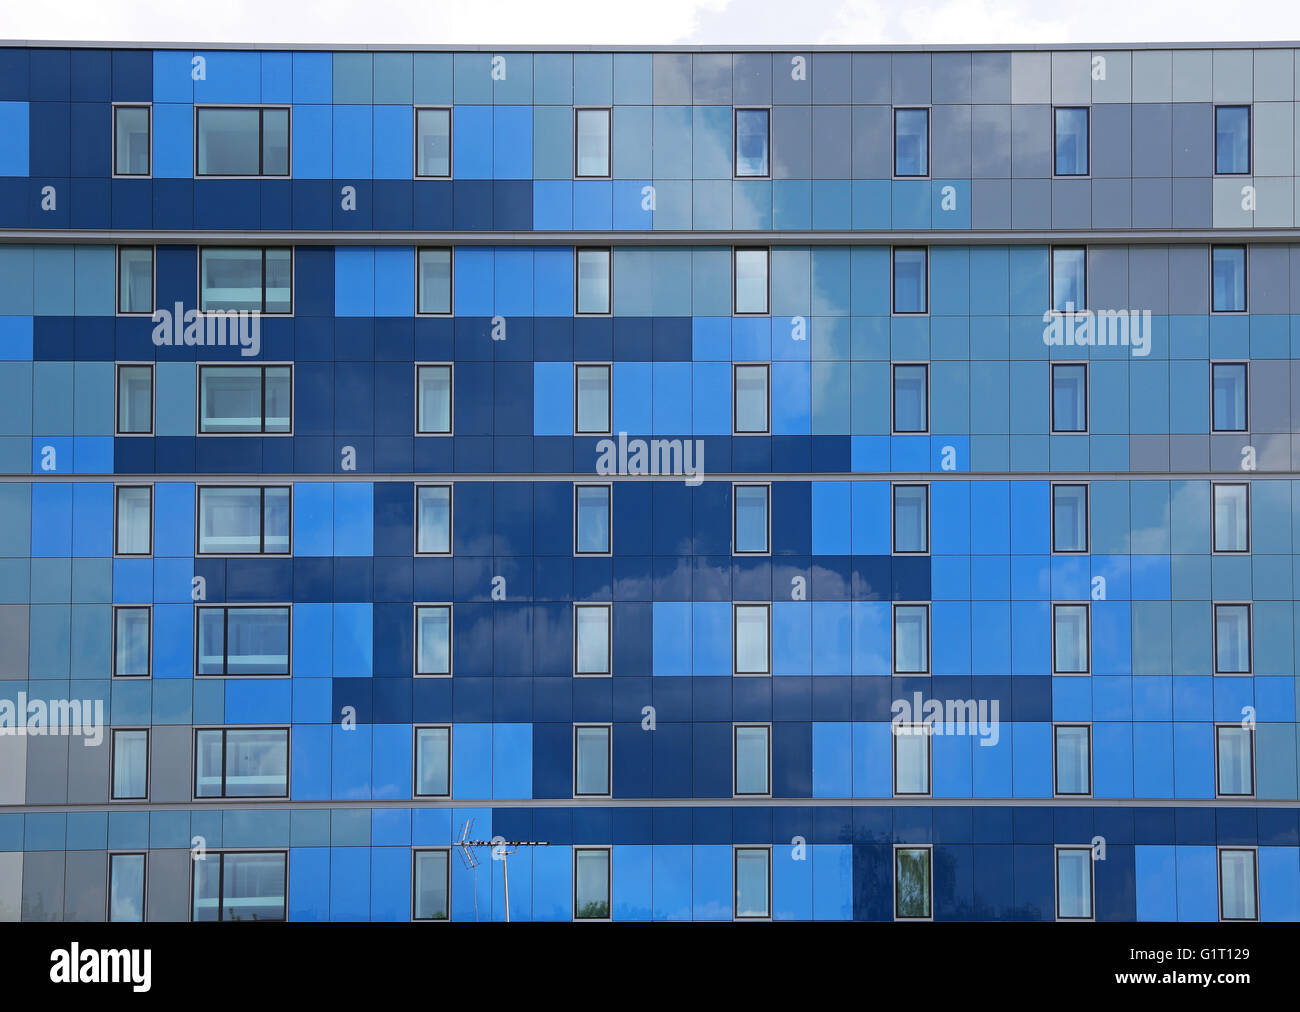 Cladding panels on the Premier Inn Hotel, Archway, London. A converted office block reclad in distinctive blue and grey panels Stock Photo